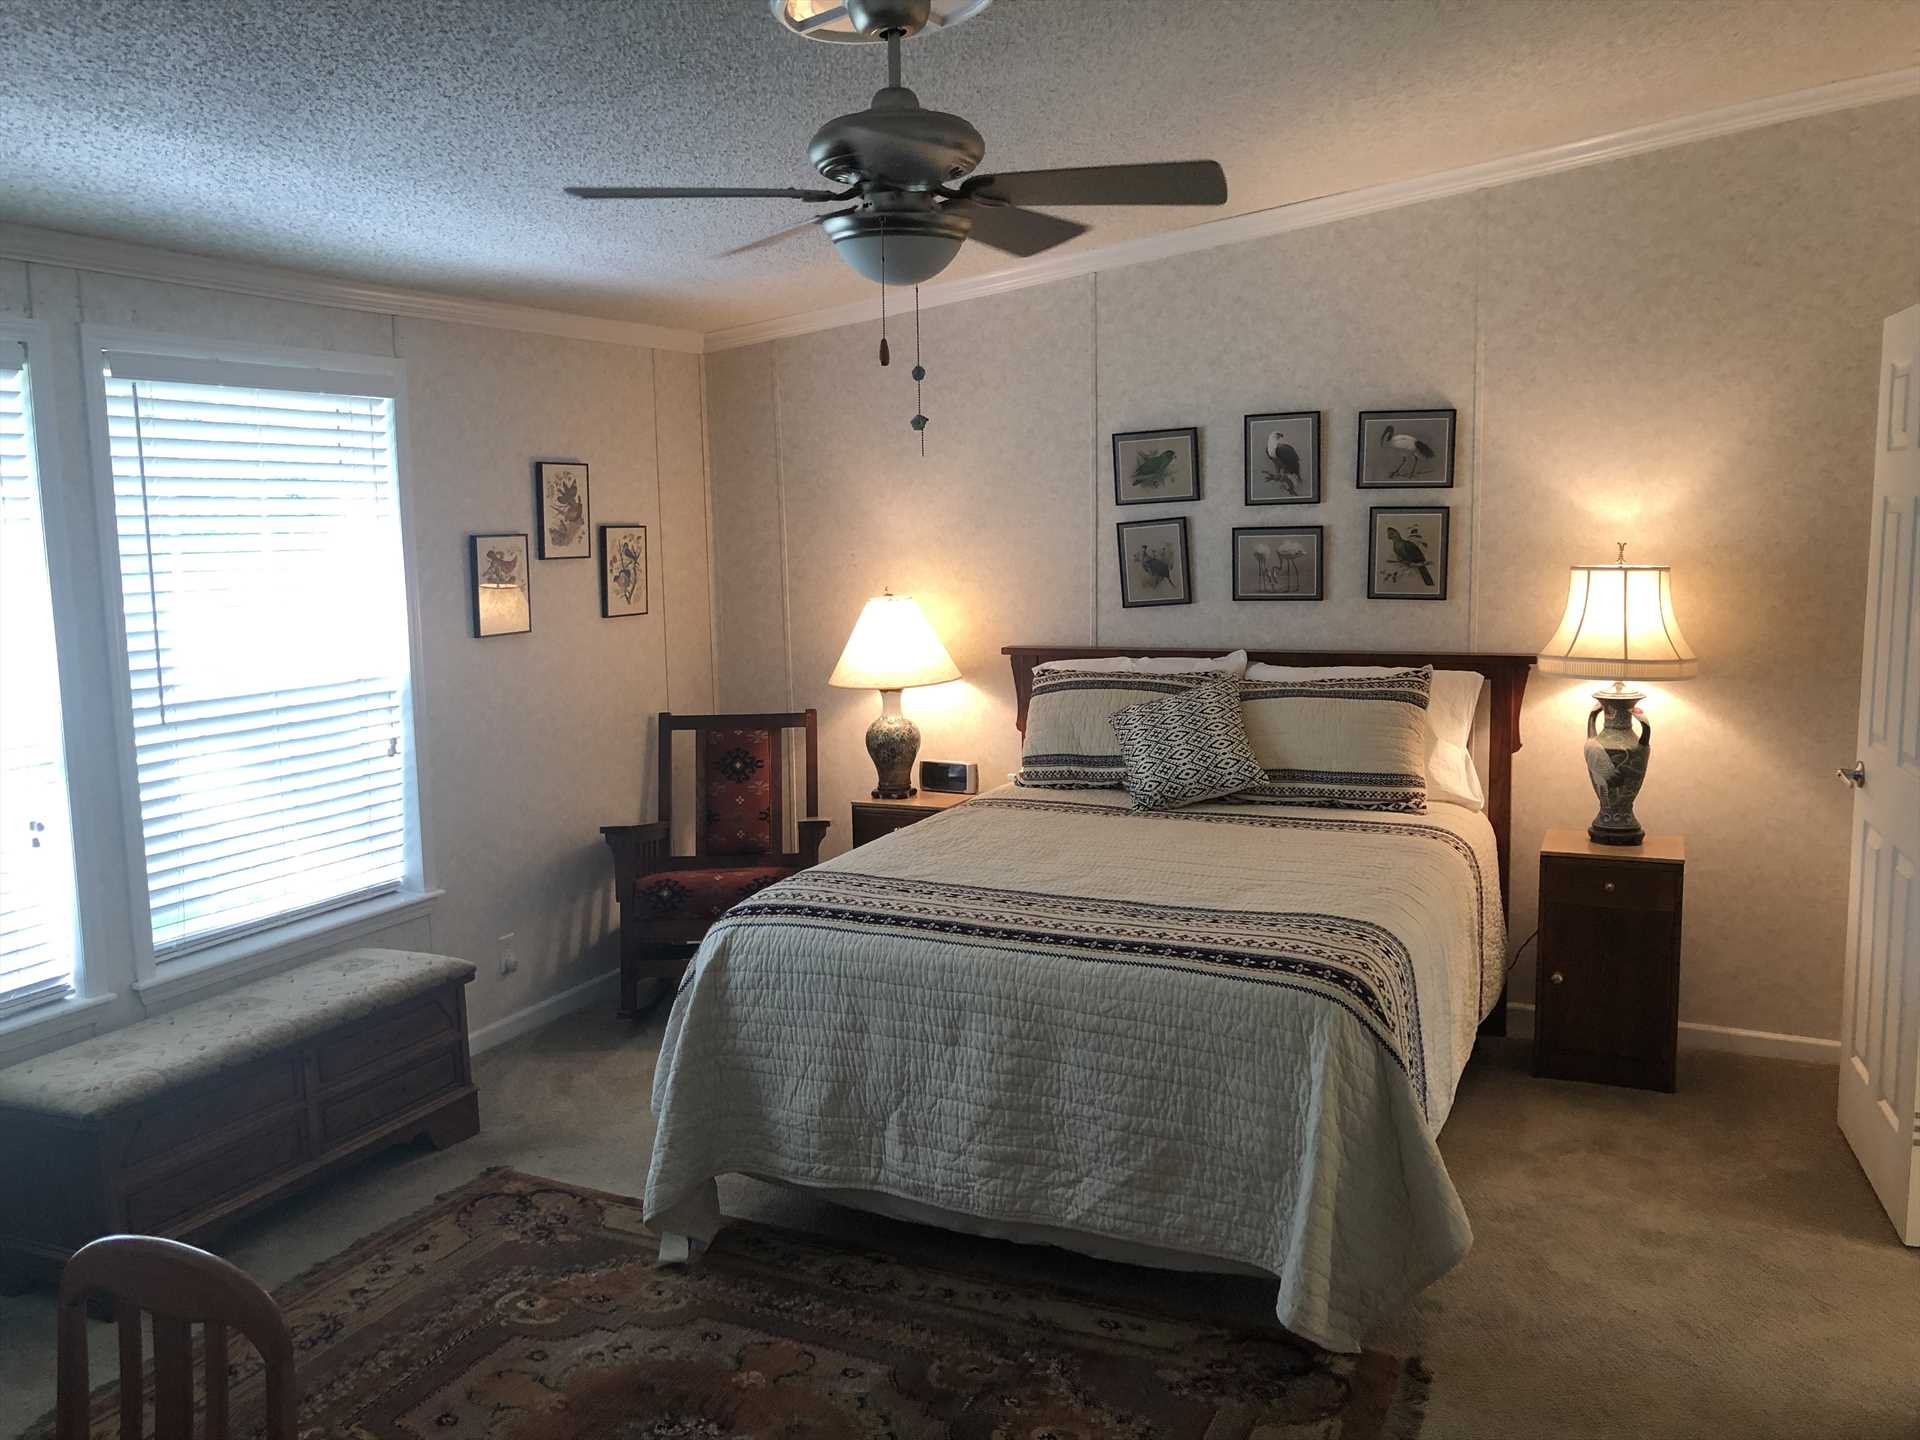                                                 The master bedroom features a queen-sized bed, and all three bedrooms feature fluffy and soft bed linens.